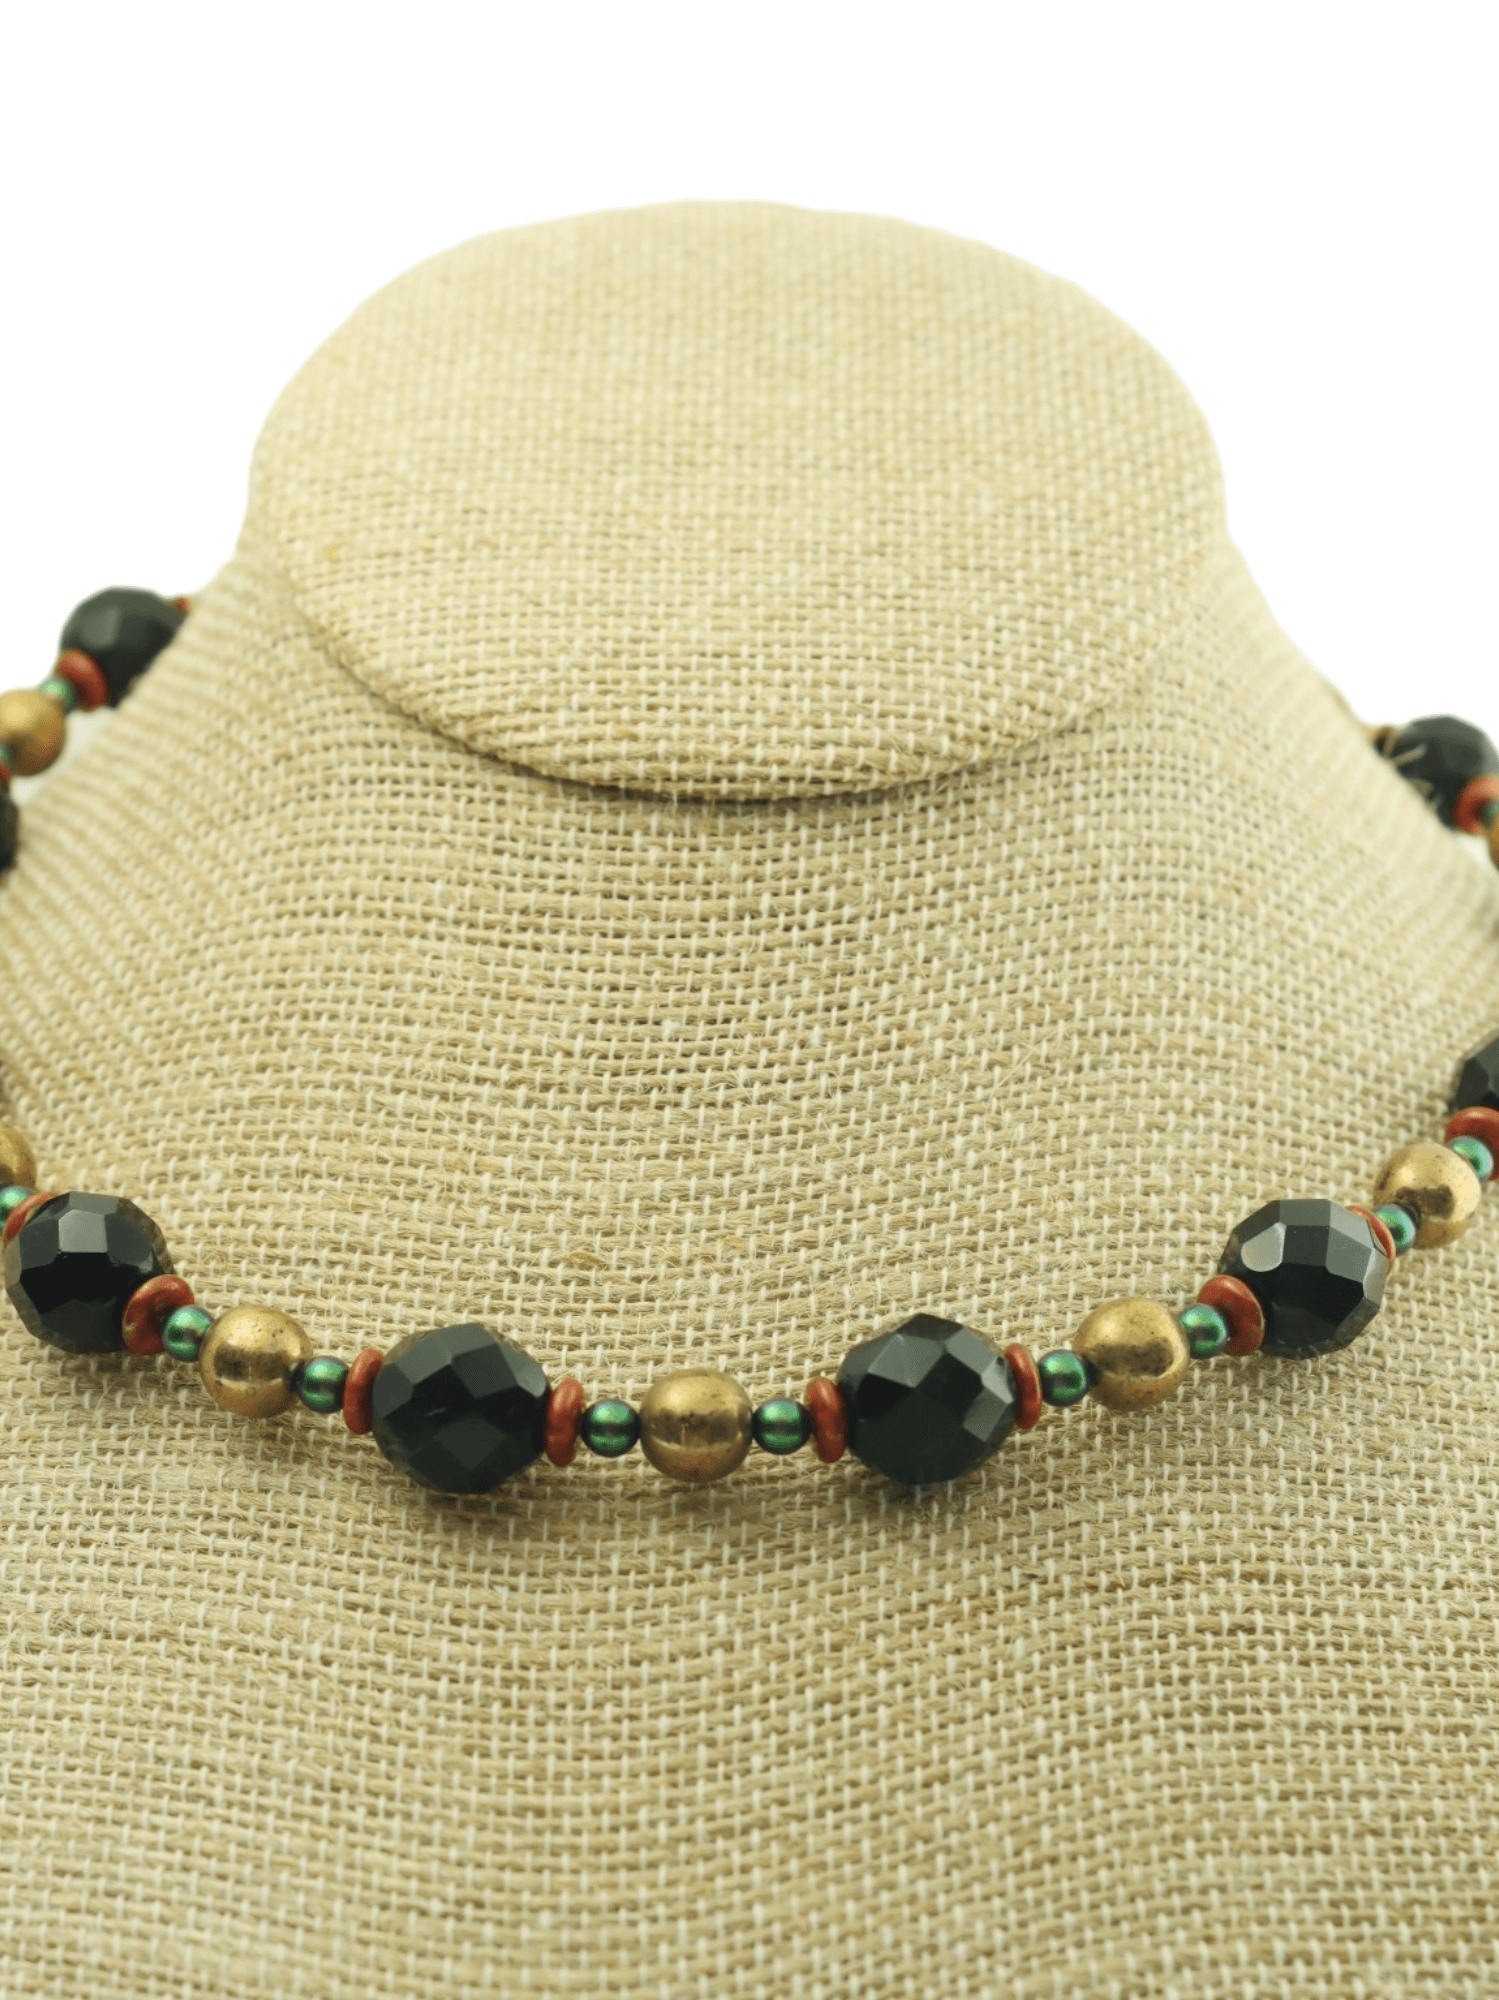 Black And Bronze Statement Boho Tropical Statement Beaded Necklace - Chunky Bold Necklace - Mexican Style Necklace - Kaleidoscopes And Polka Dots